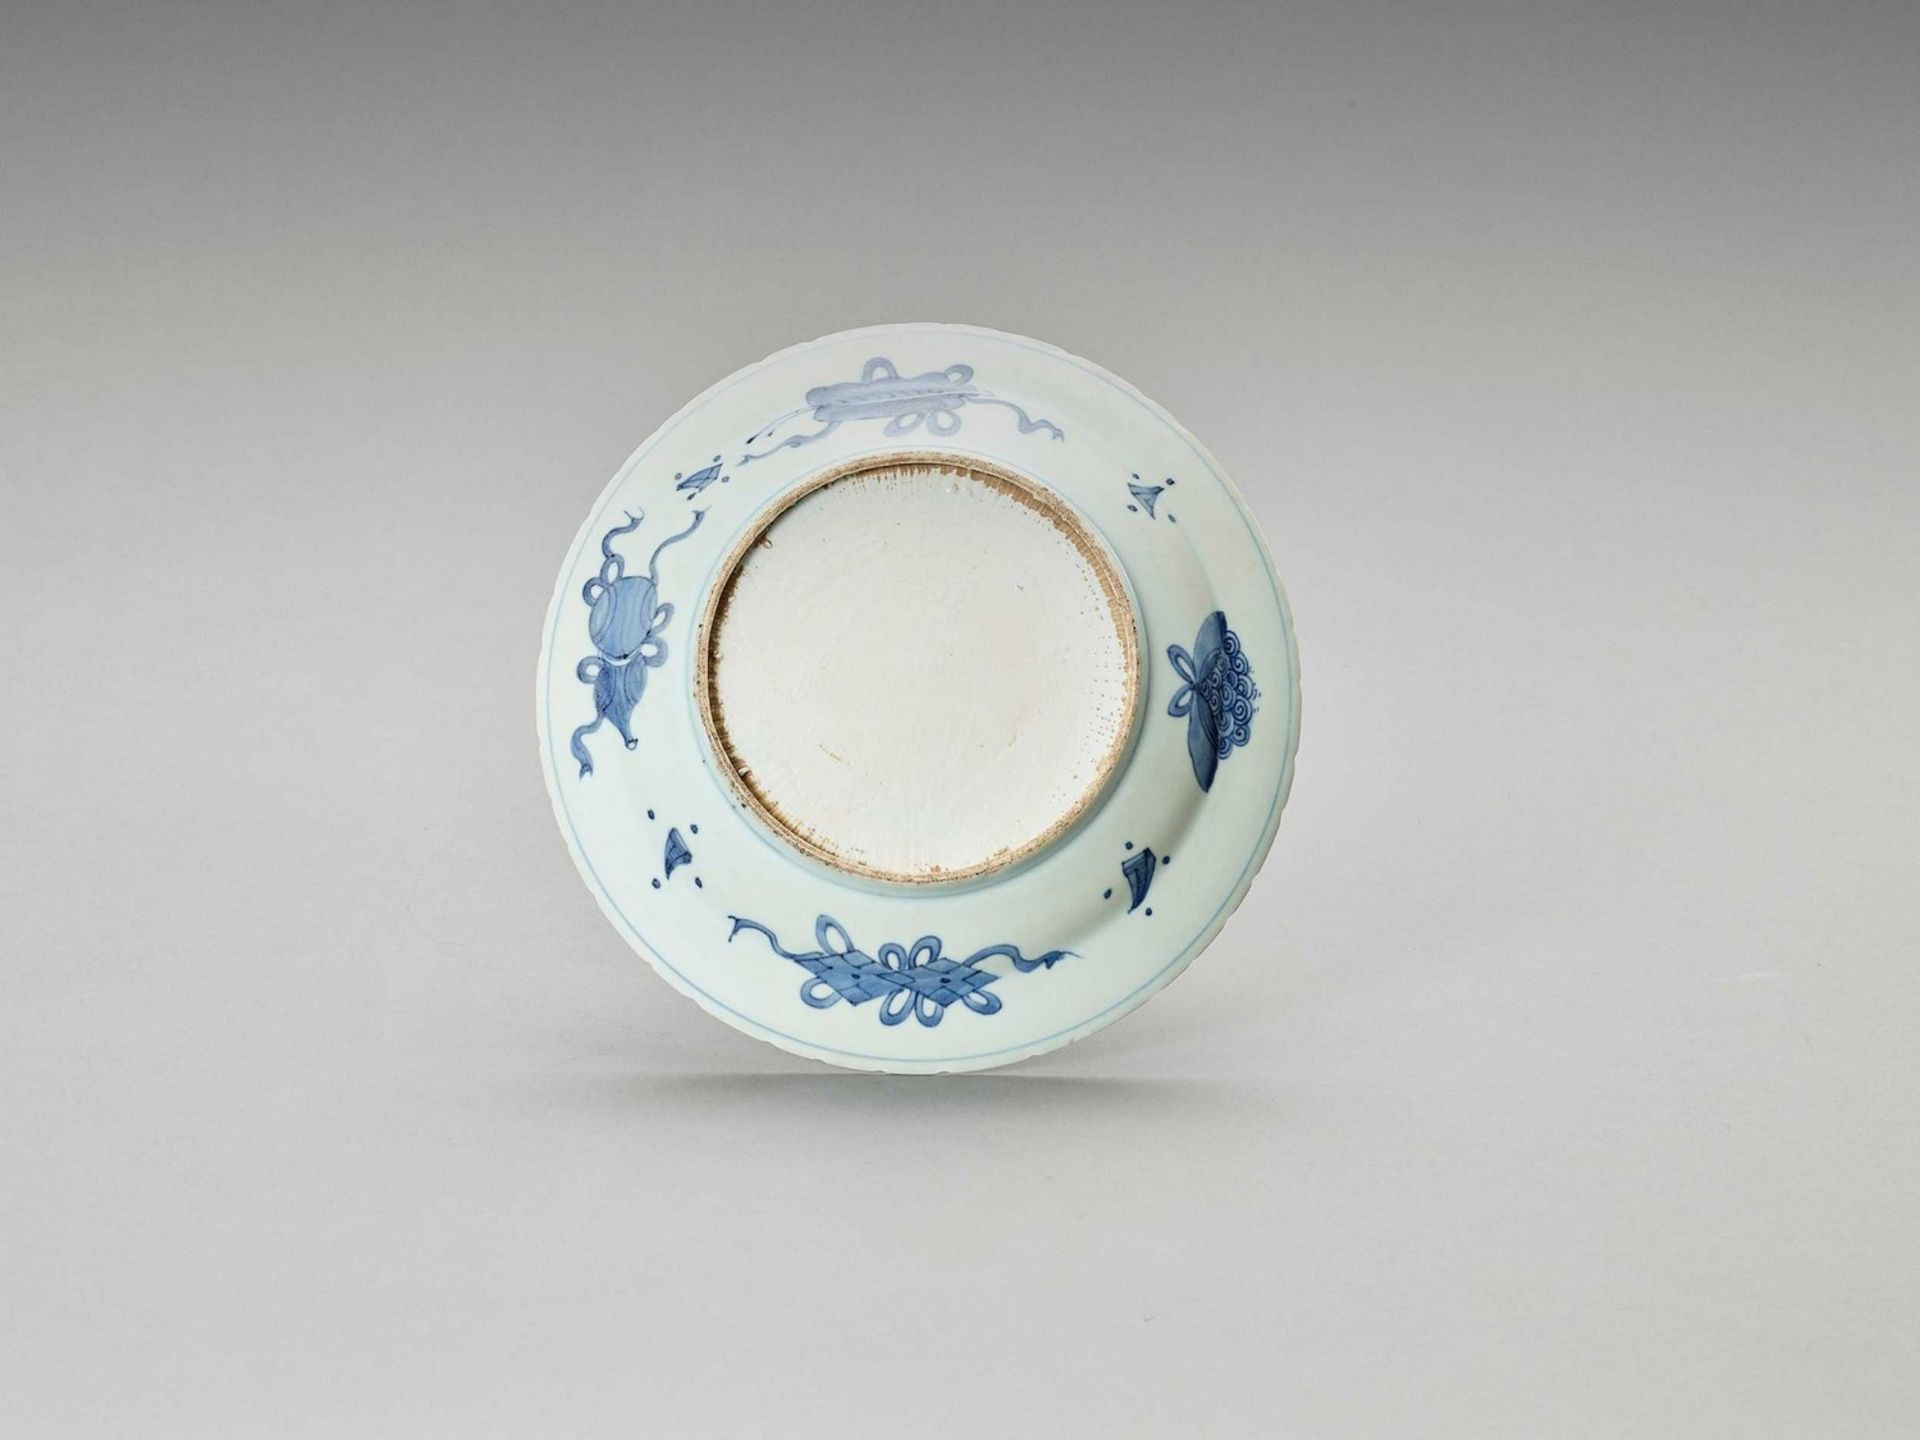 A RARE BLUE AND WHITE PORCELAIN DISH - Image 3 of 4